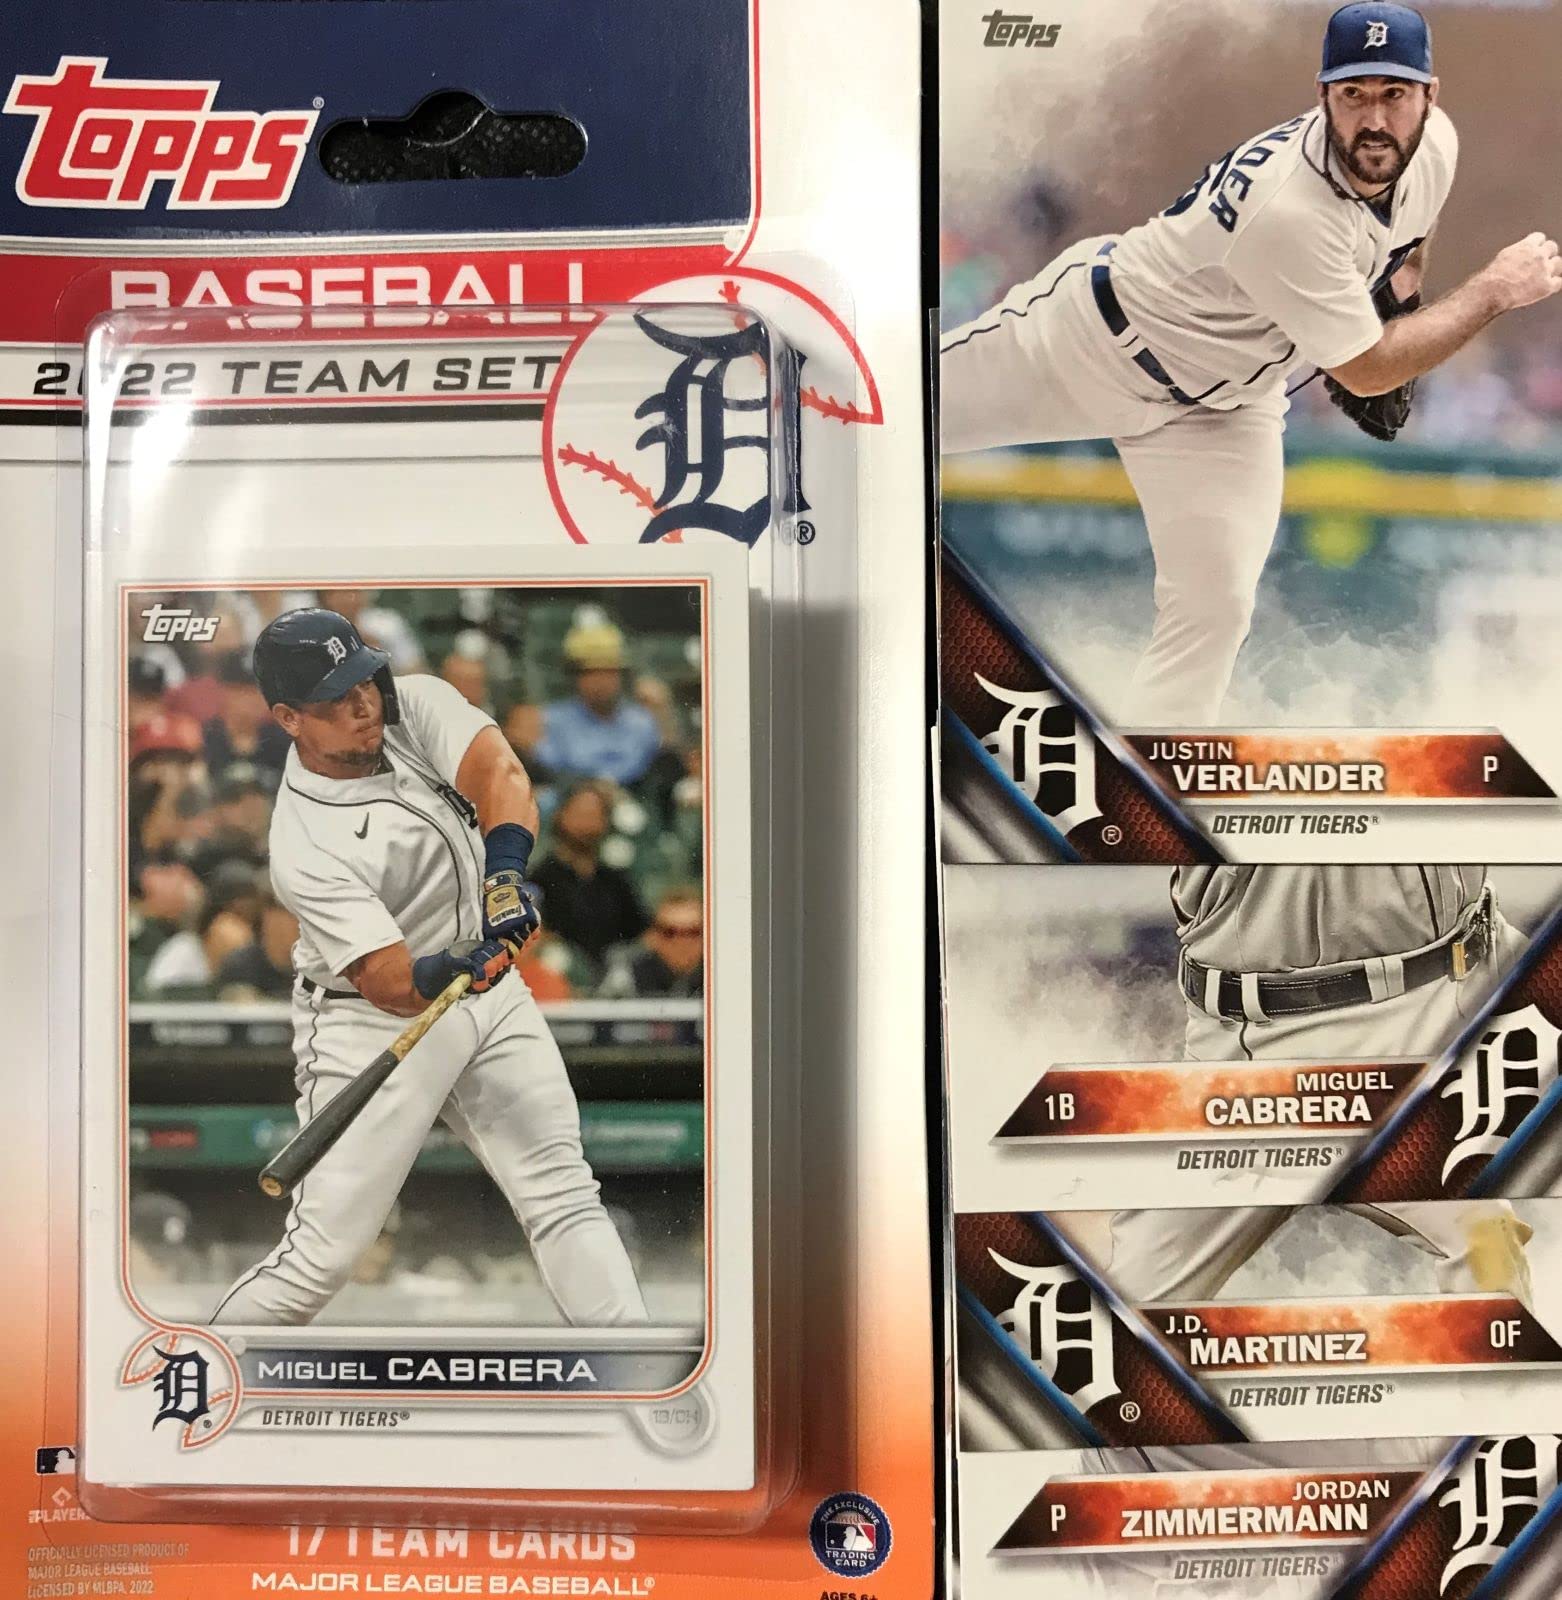 Detroit Tigers 2 Team Set Gift Lot Including a 2022 Factory Sealed Version  and a 2016 Regular Issue 20 Card Team Set with Miguel Cabrera and Justin  Verlander plus